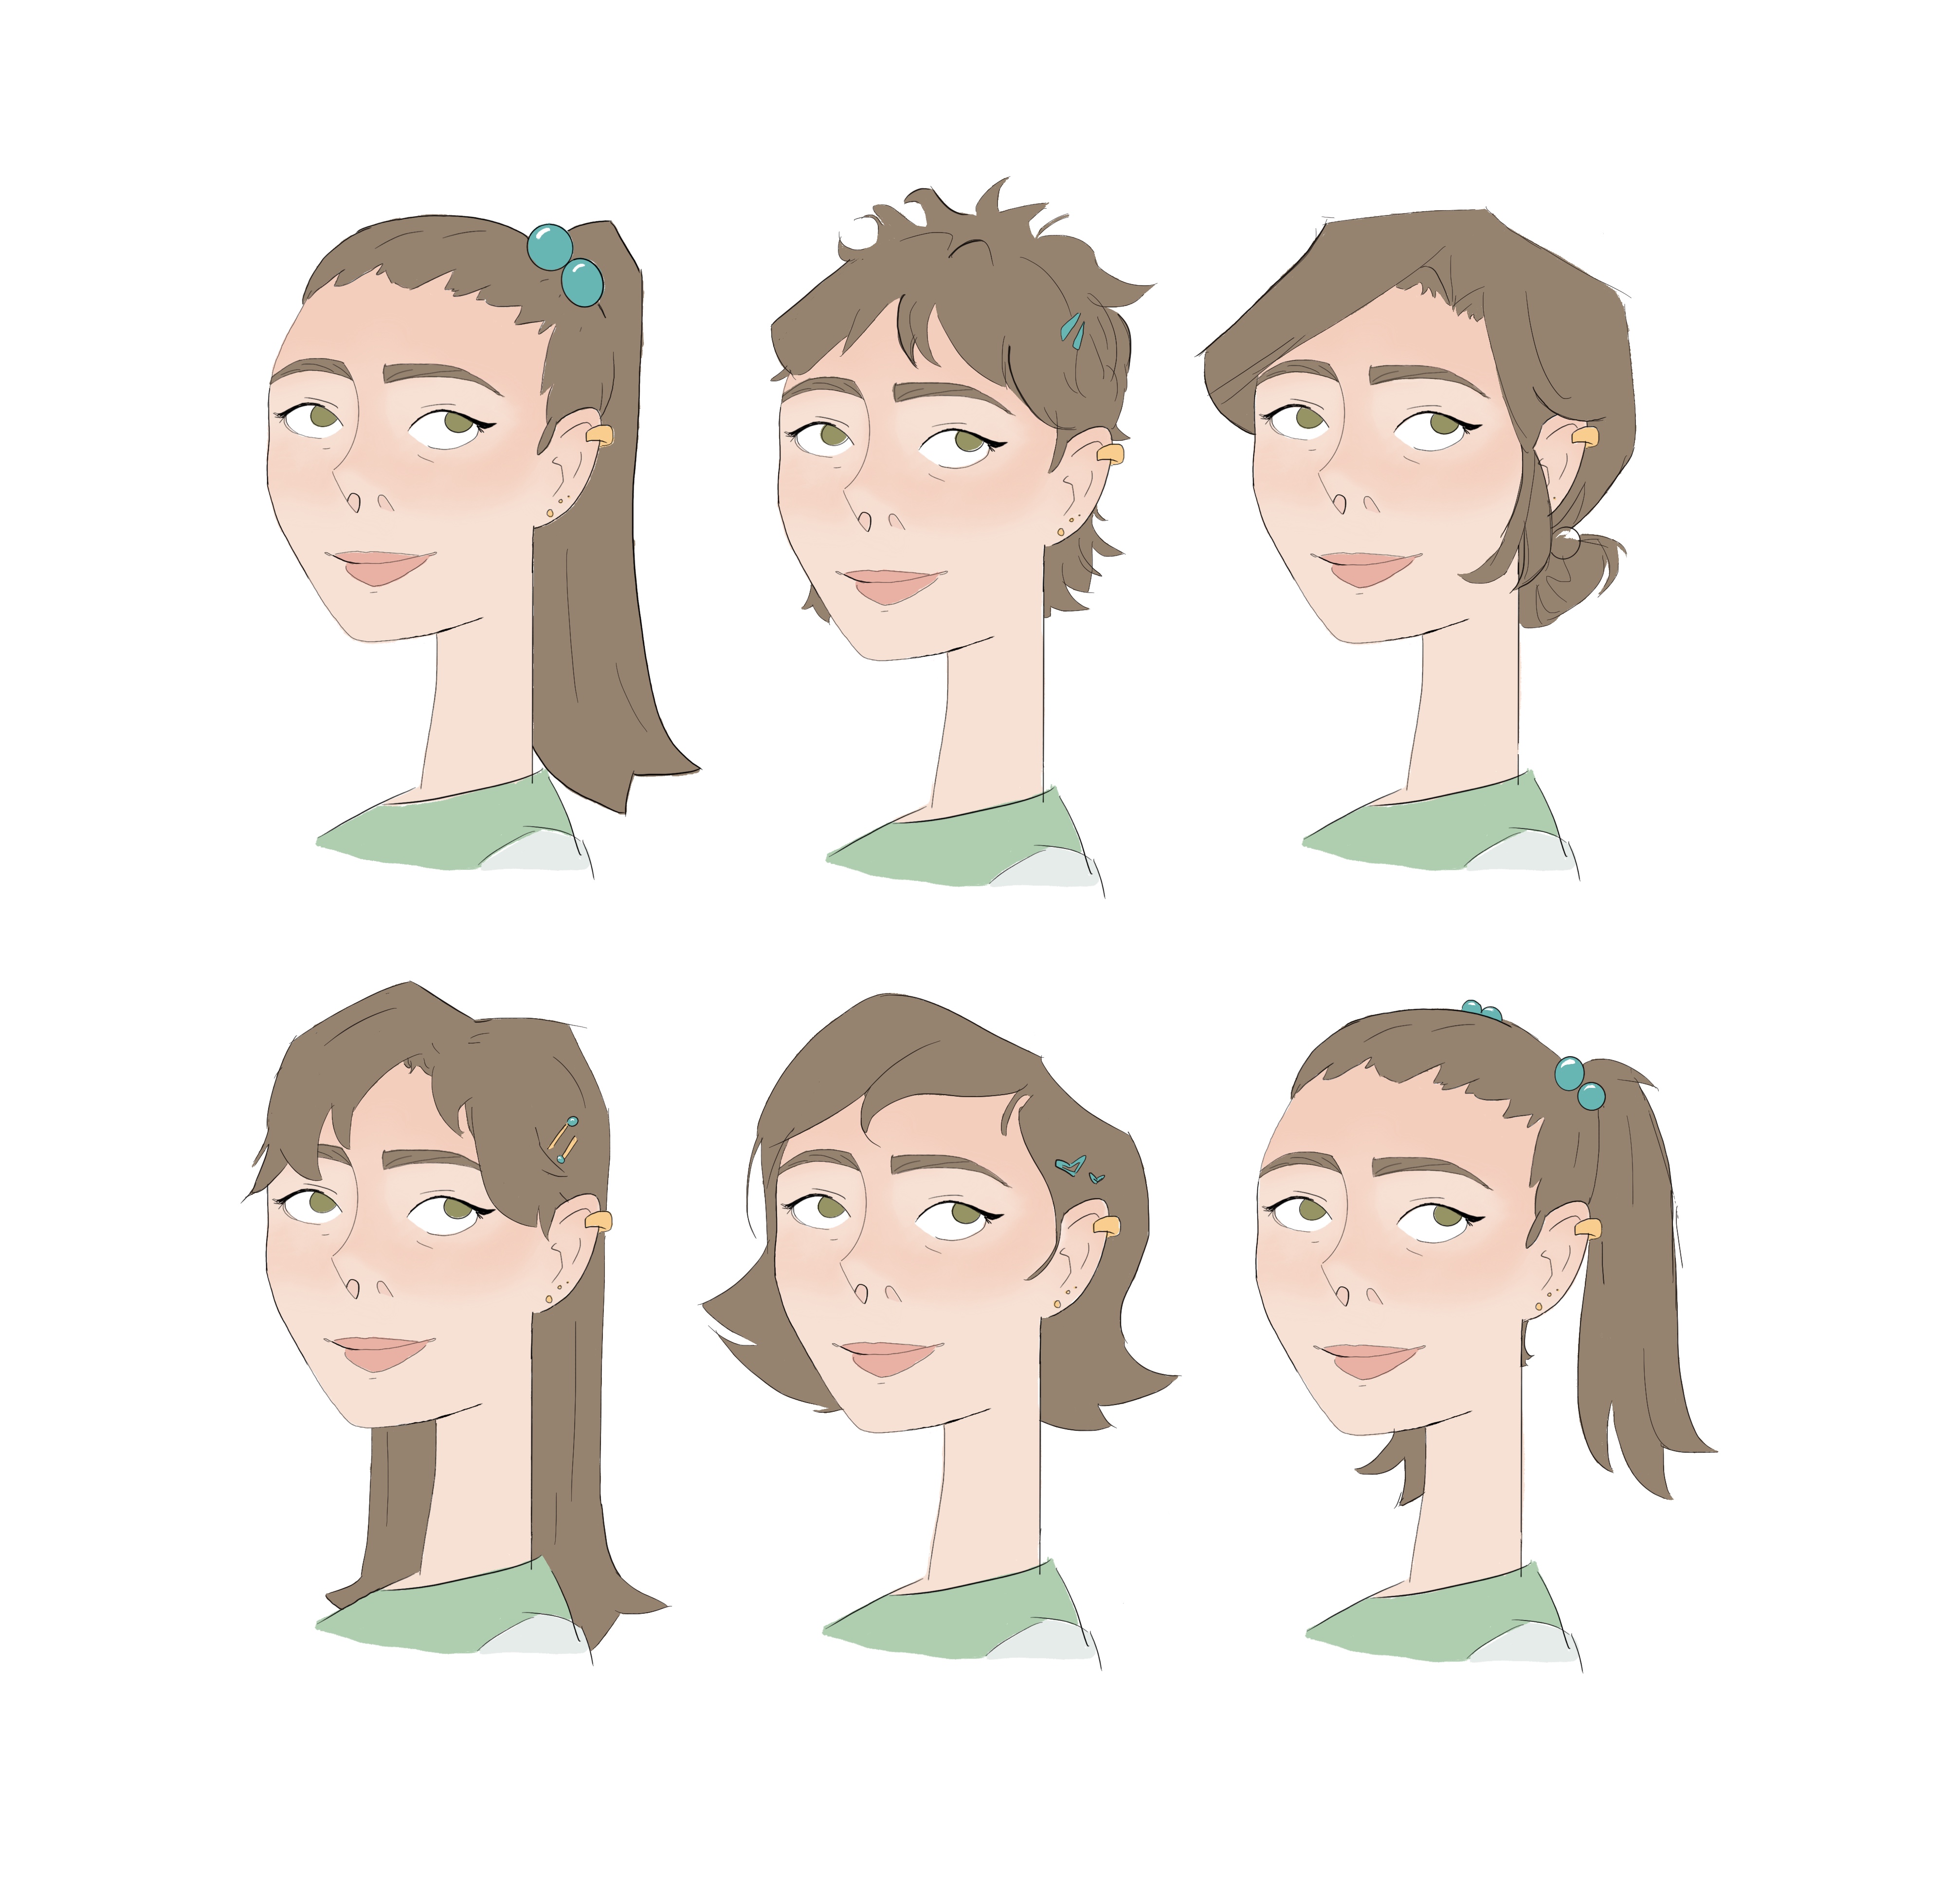 Hair style exploration for an original character design